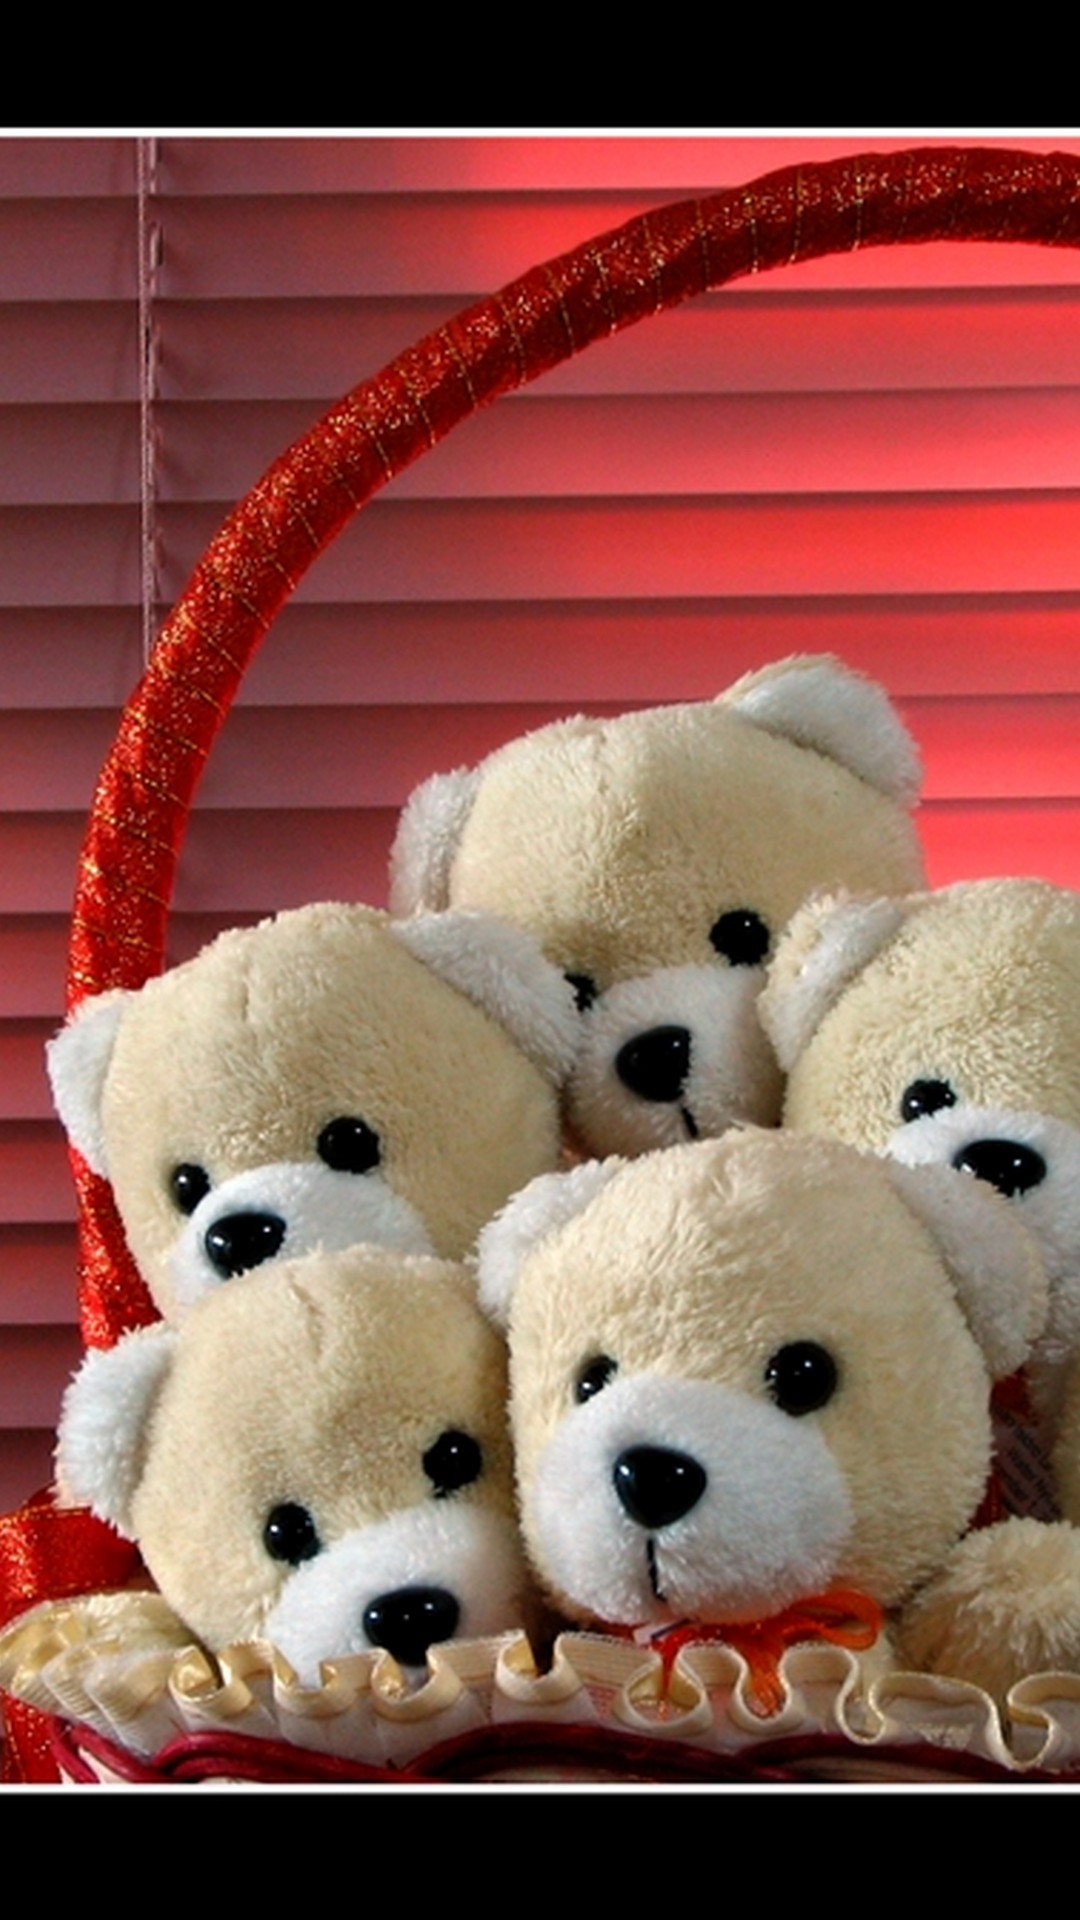 iPhone Wallpaper Cute Teddy Bear with image resolution 1080x1920 pixel. You can make this wallpaper for your iPhone 5, 6, 7, 8, X backgrounds, Mobile Screensaver, or iPad Lock Screen